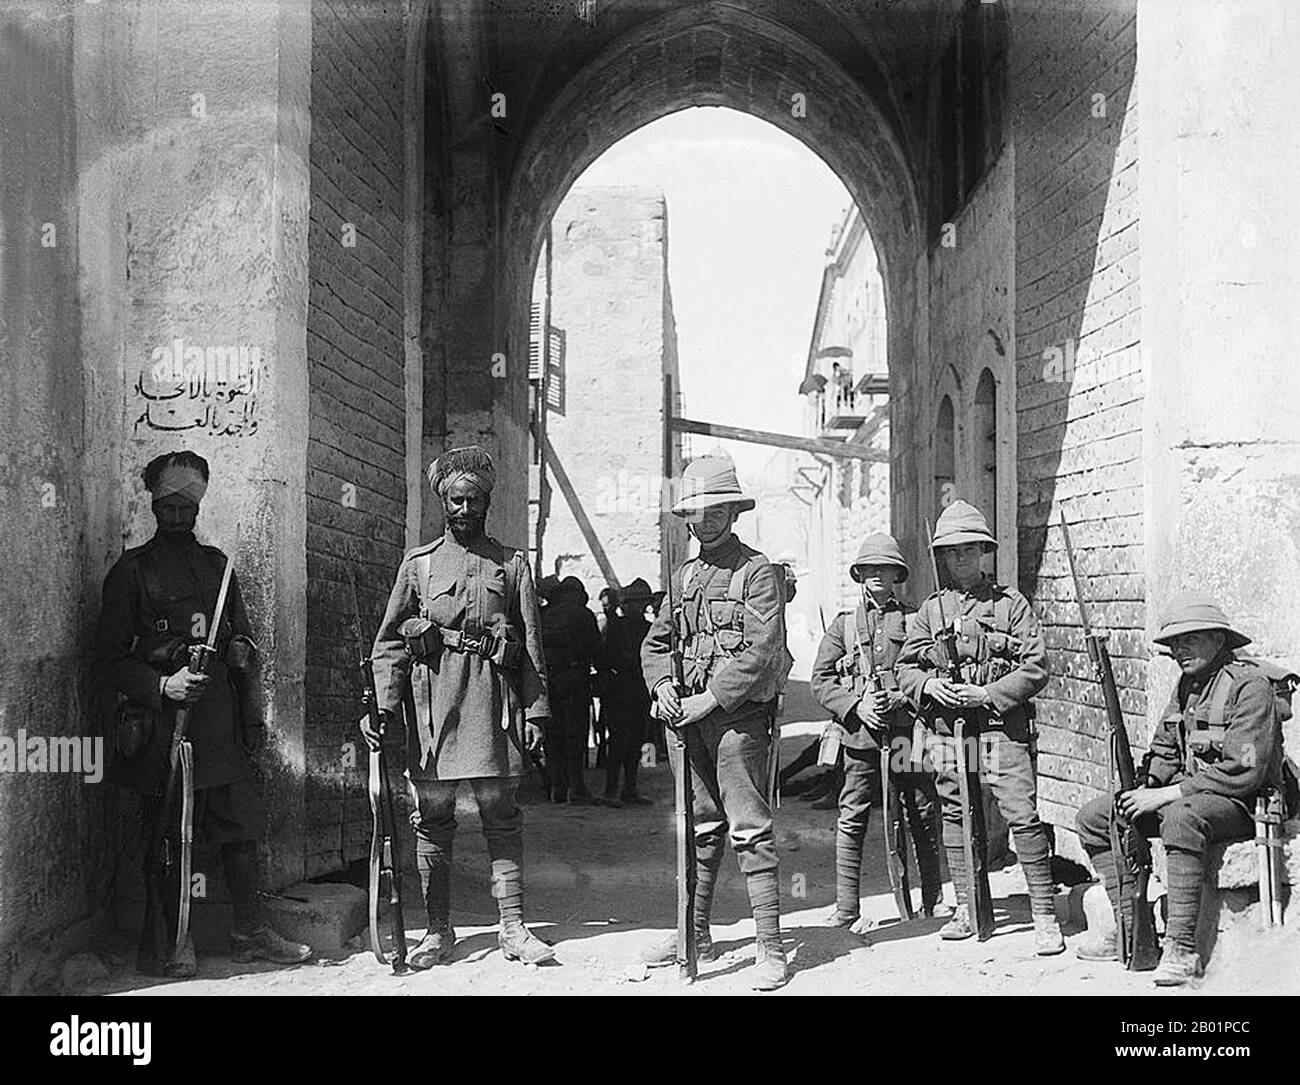 The Middle Eastern theatre of World War I was the scene of action between 29 October 1914, and 30 October 1918. The combatants were the Ottoman Empire, with some assistance from the other Central Powers, and primarily the British and the Russians among the Allies of World War I. There were five main campaigns: the Sinai and Palestine Campaign, the Mesopotamian Campaign, the Caucasus Campaign, the Persian Campaign, and the Gallipoli Campaign. Stock Photo